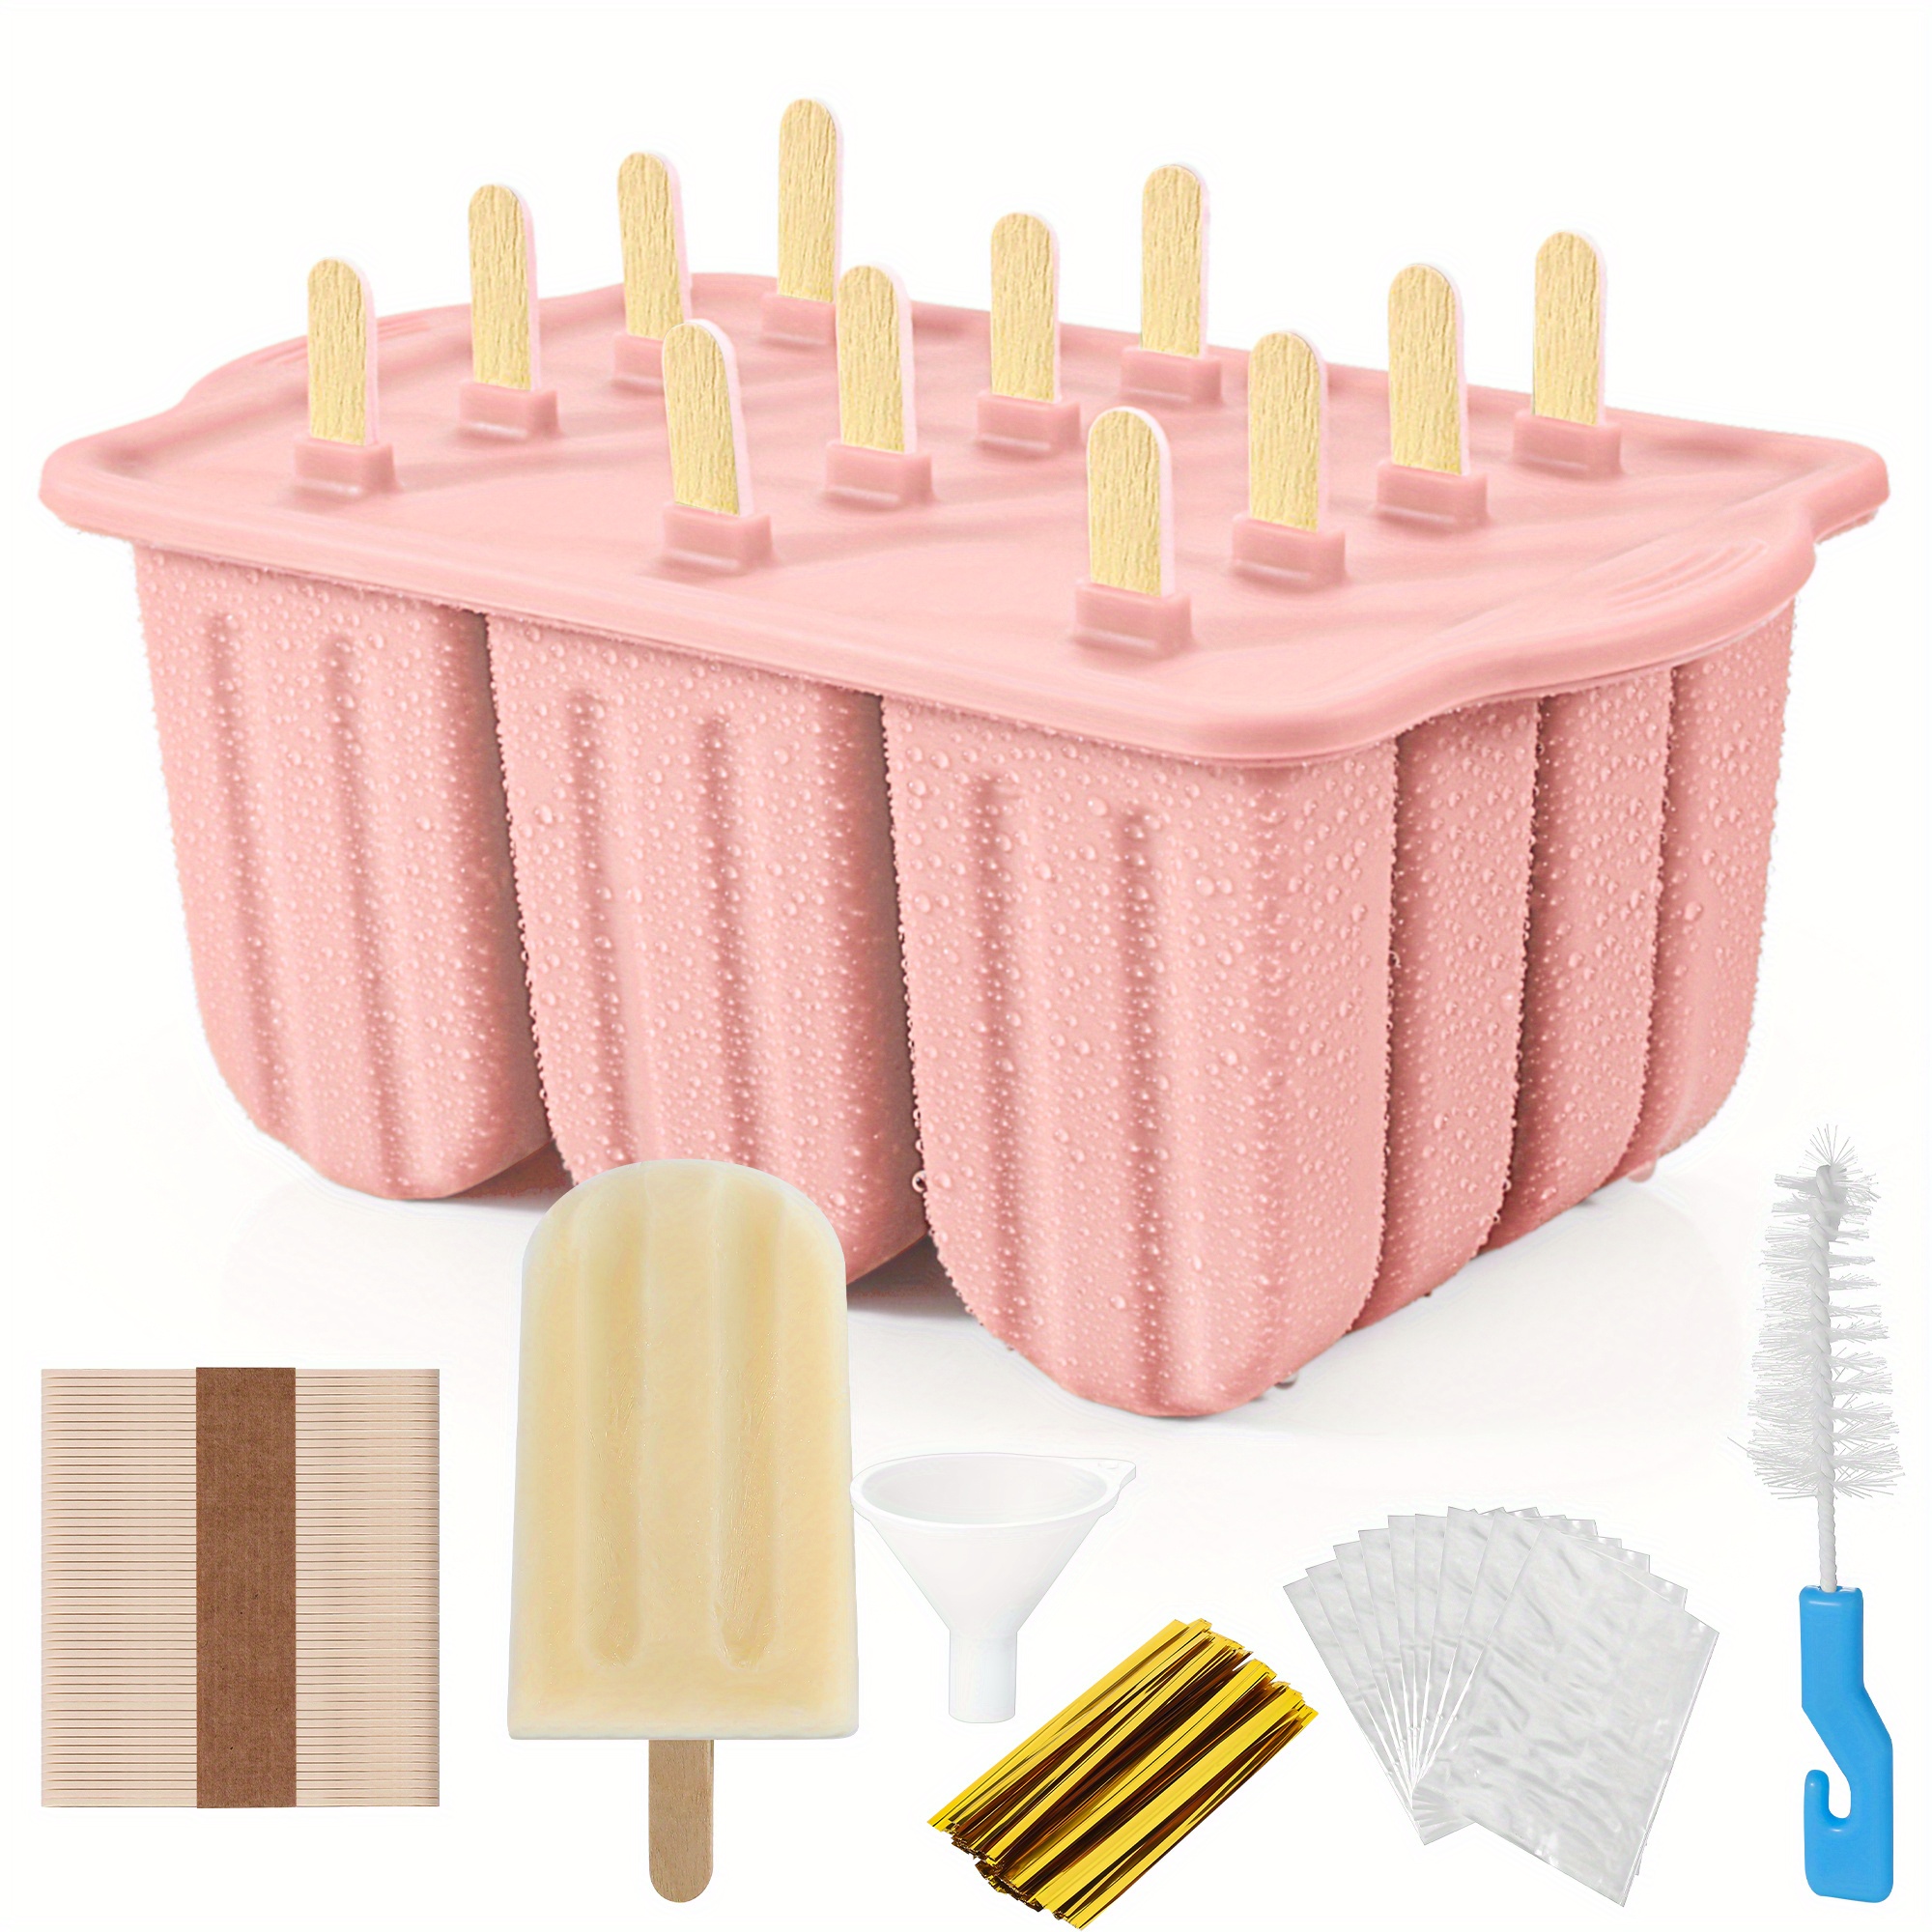 Best Selling Silicone Popsicle Molds Maker Large Homemade Ice Pop